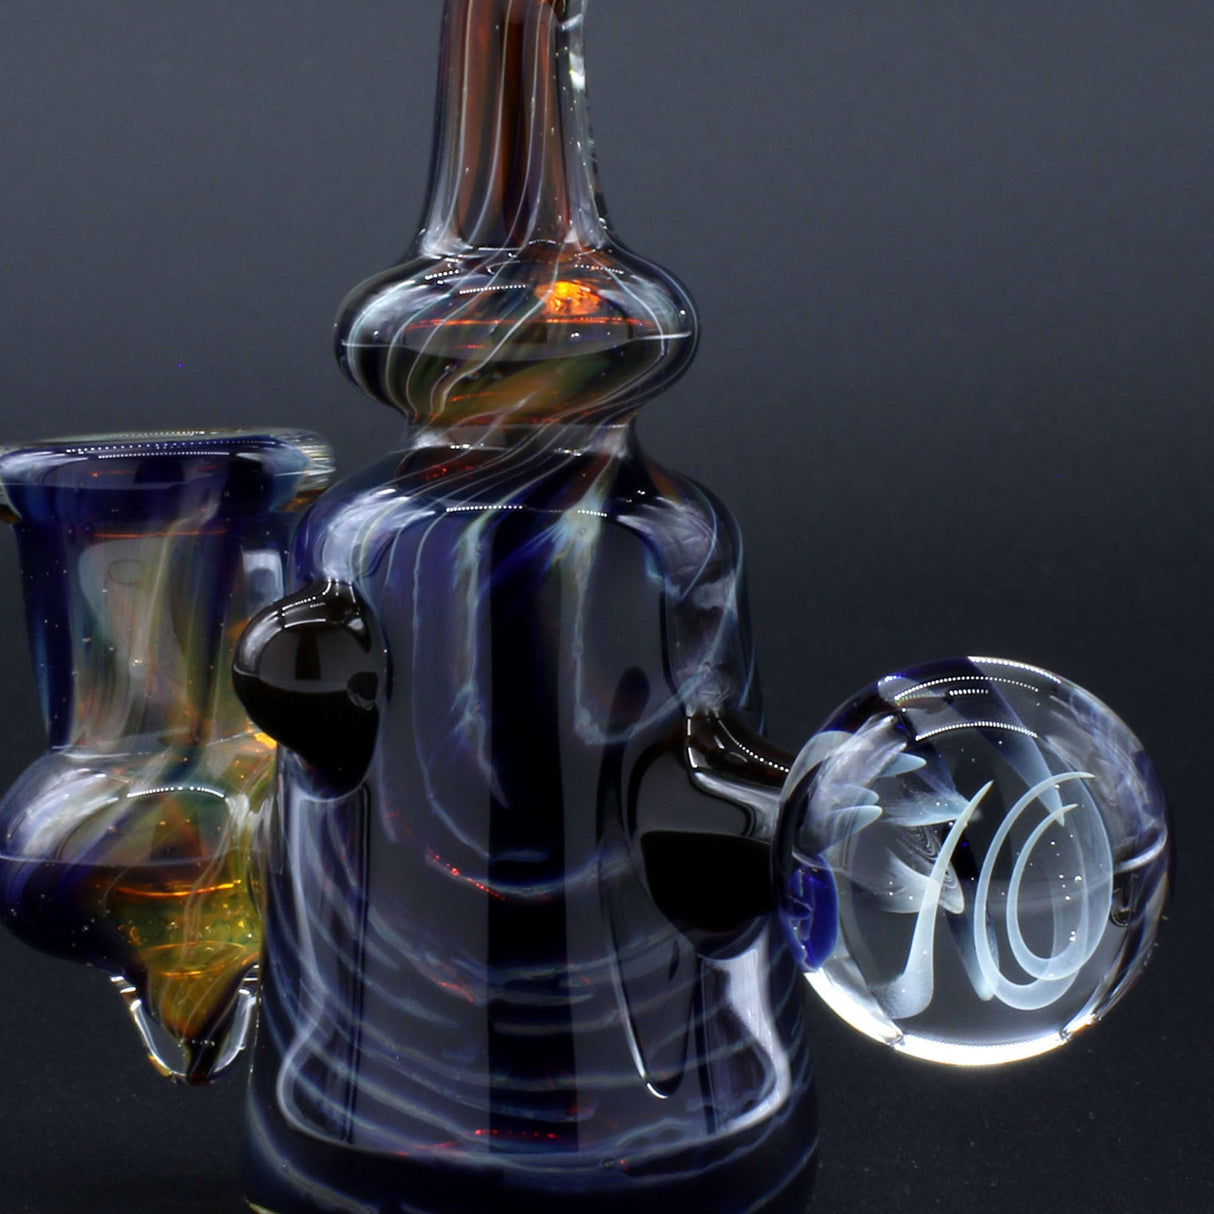 Clayball Glass "Black Moon" Heady Sherlock Dab Rig with artistic design, side view on dark background